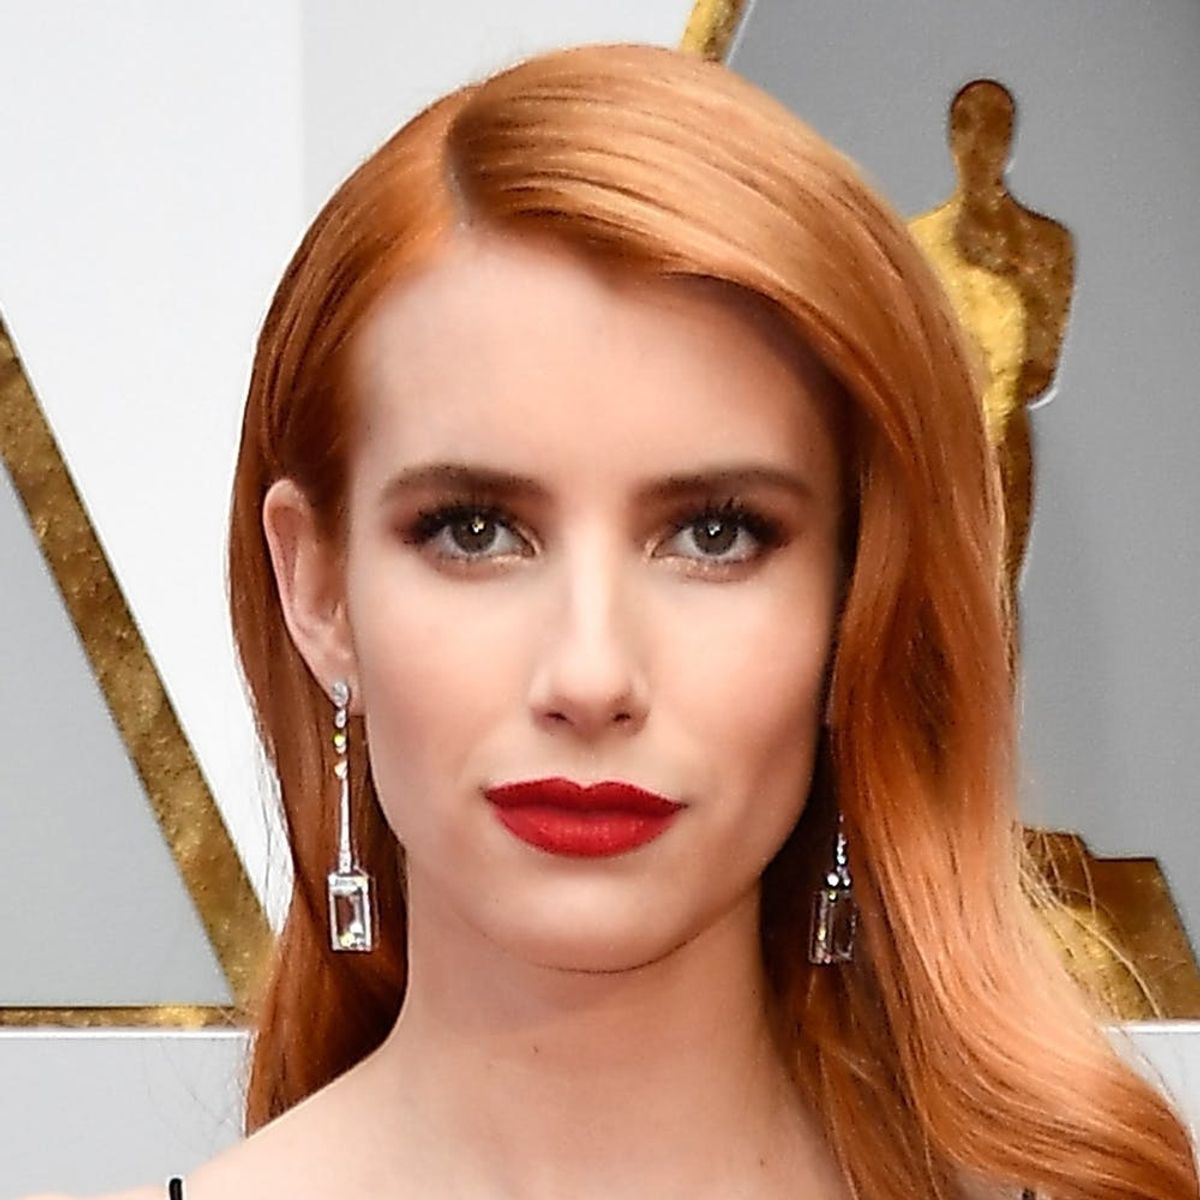 Emma Roberts’ New Smoky Quartz Hair Color Will Make You Want to Hit the Salon, Stat